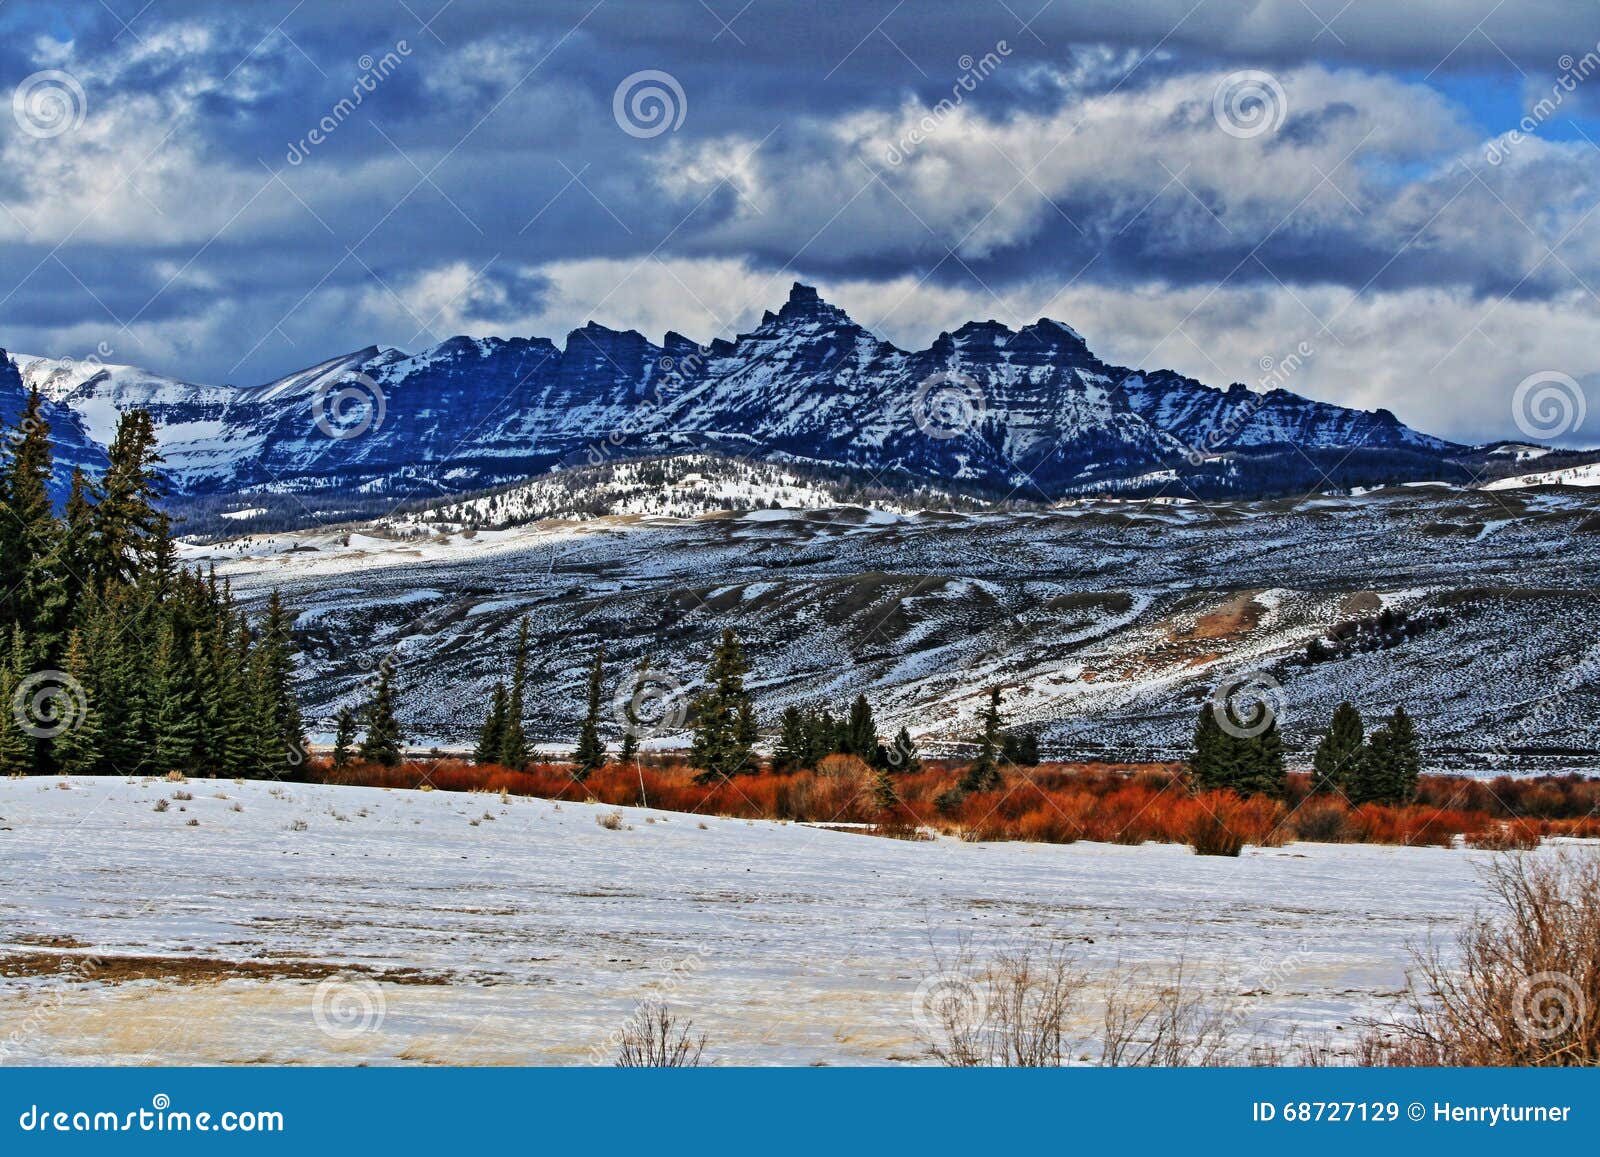 sublette peak in the absaroka mountain range on togwotee pass as seen from dubois wyoming